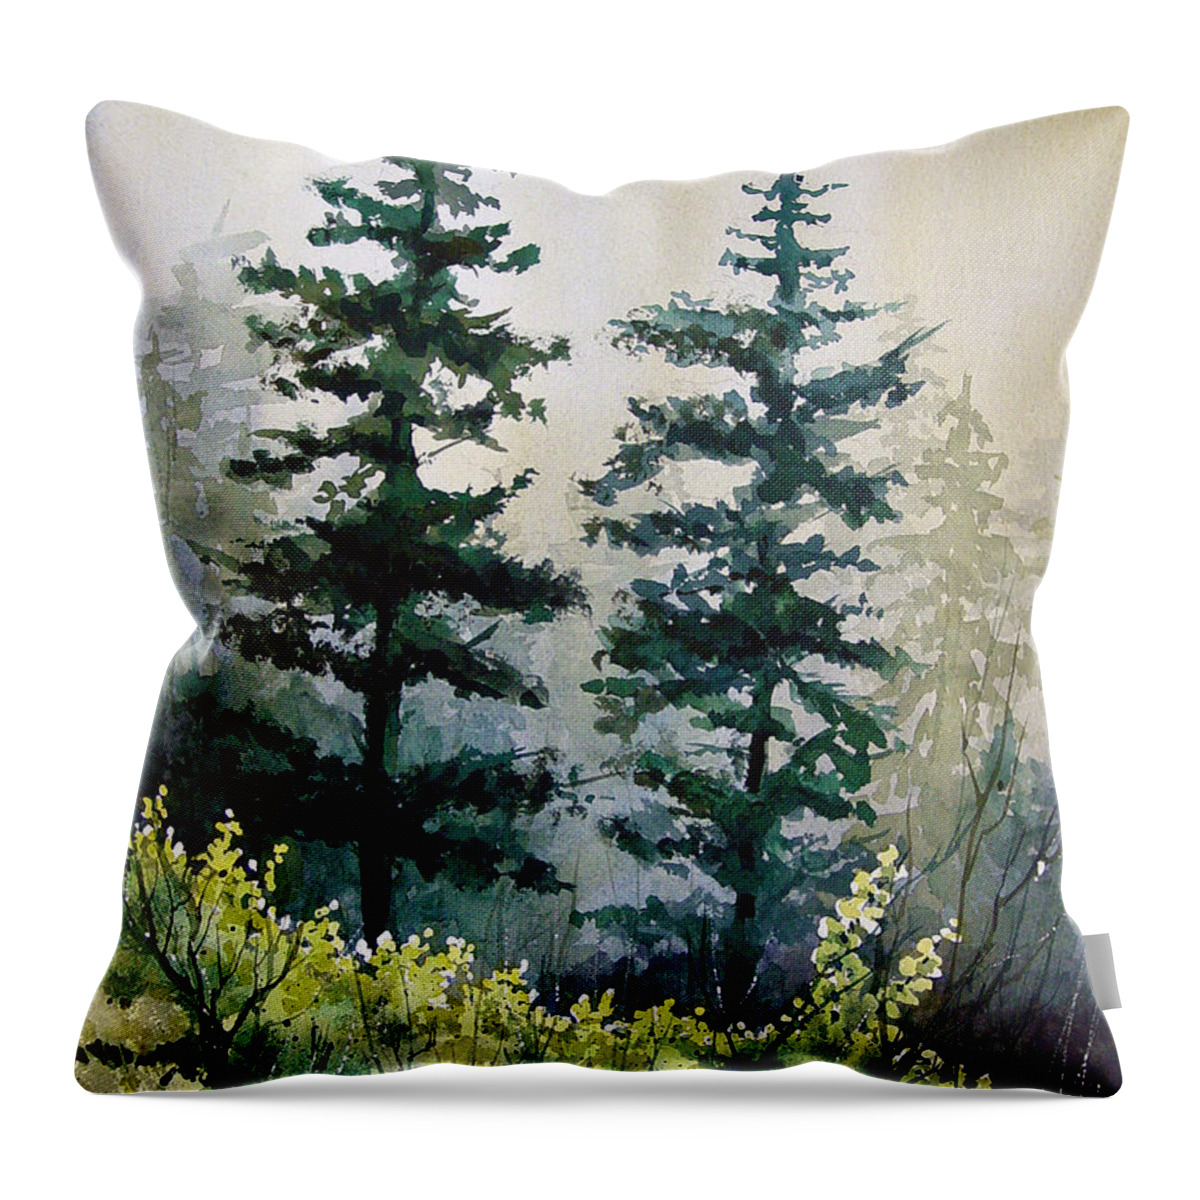 Morning Throw Pillow featuring the painting Morning by Sam Sidders